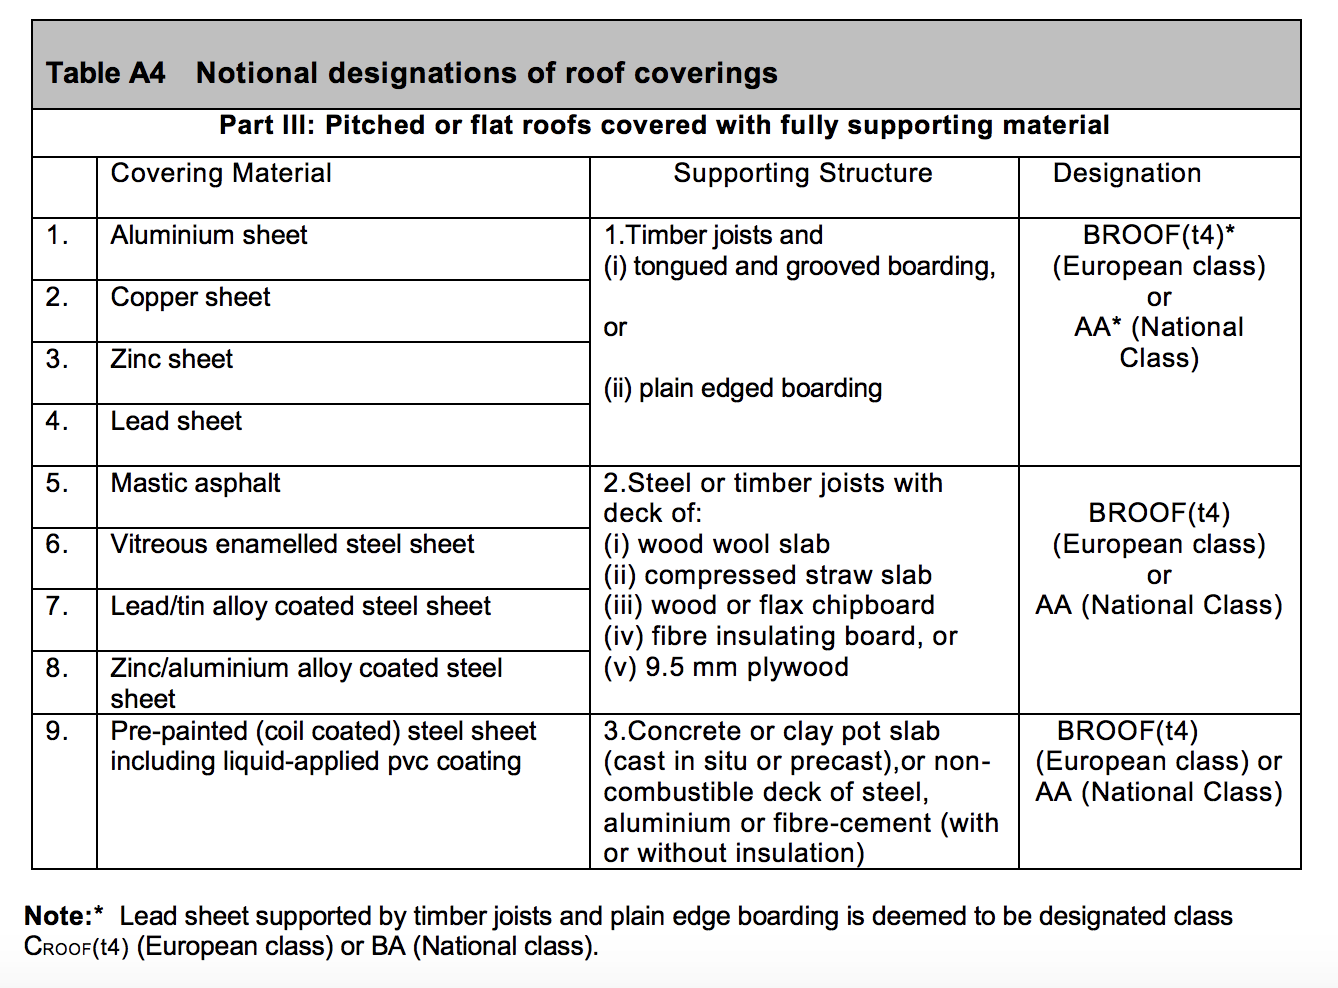 Table HB14 - Notional designations on roof coverings, Part III: Pitched or flat roofs covered with fully supporting material - Extract from TGD B Vol. 2